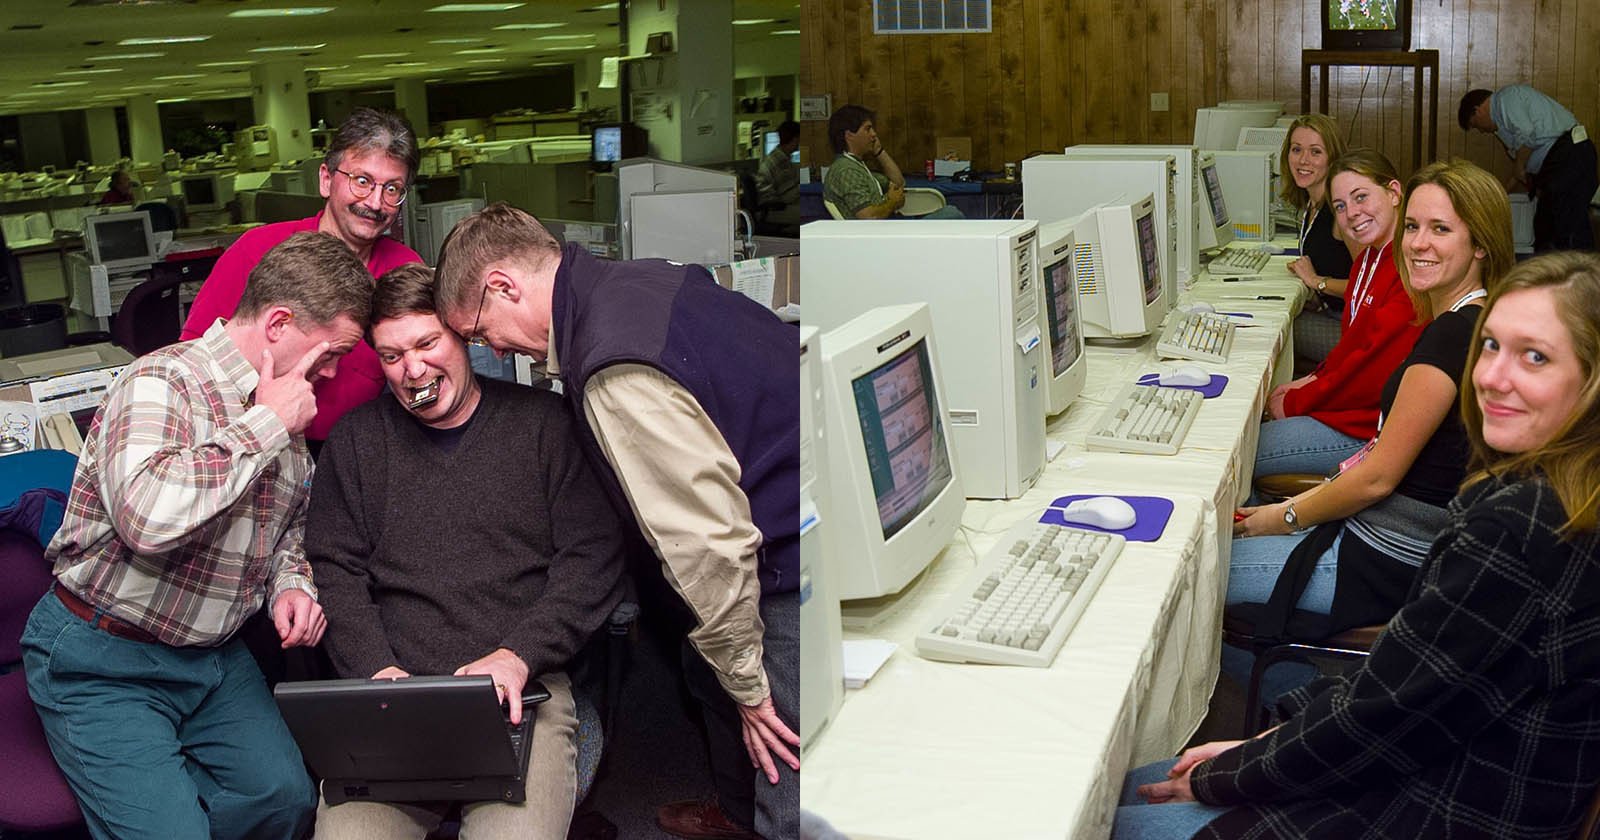 How Photo Mechanic Was Born at Super Bowl XXXII in 1998